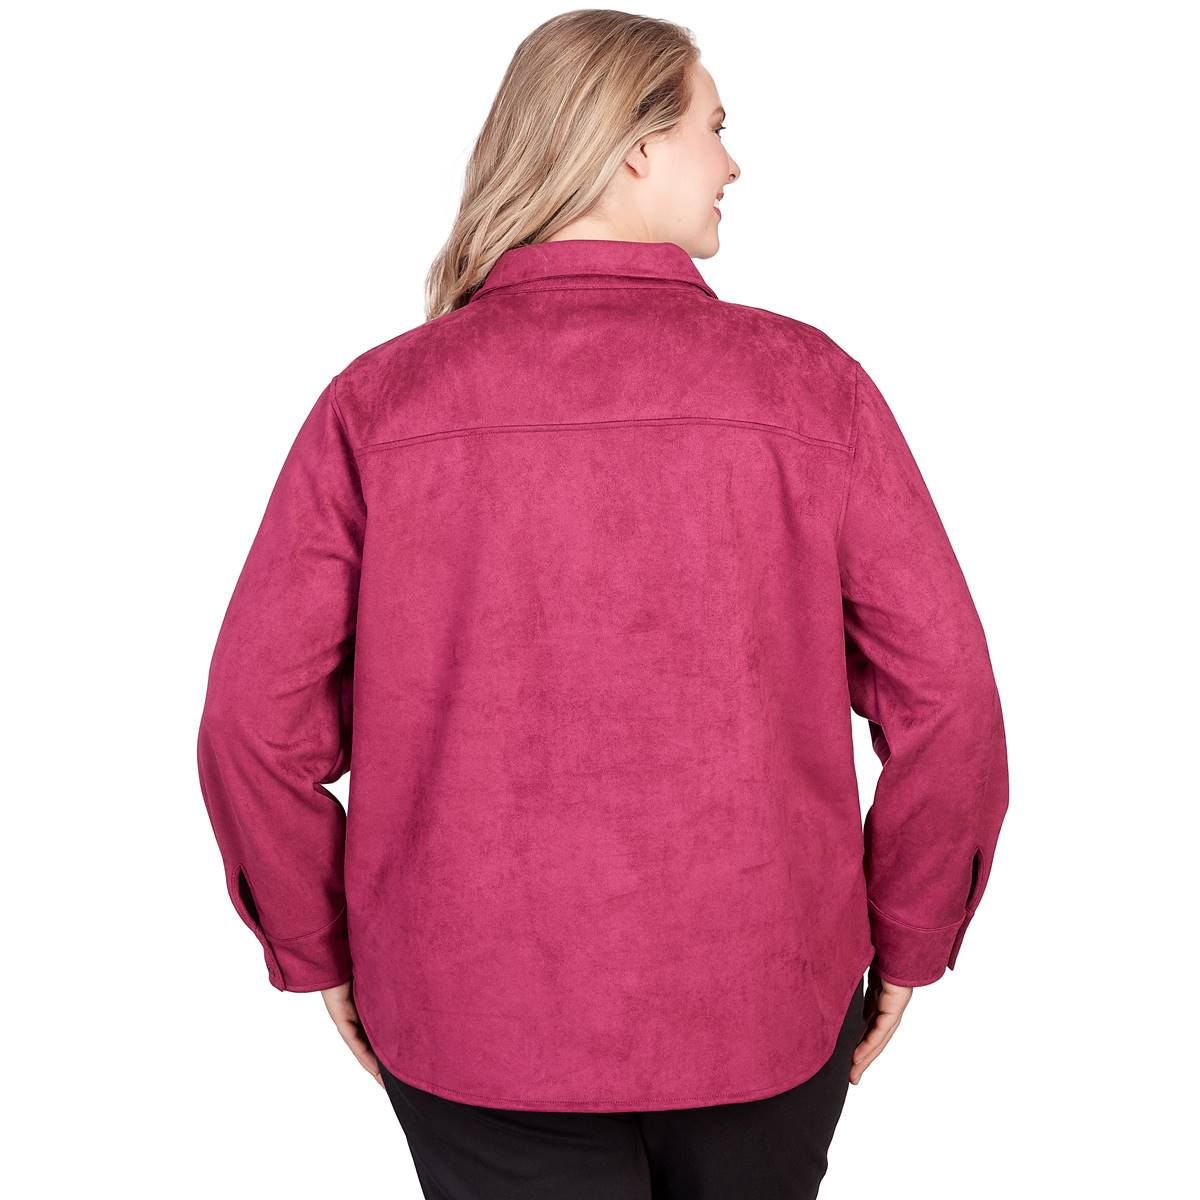 Plus Size Hearts Of Palm Berry In Love Faux Suede Shacket